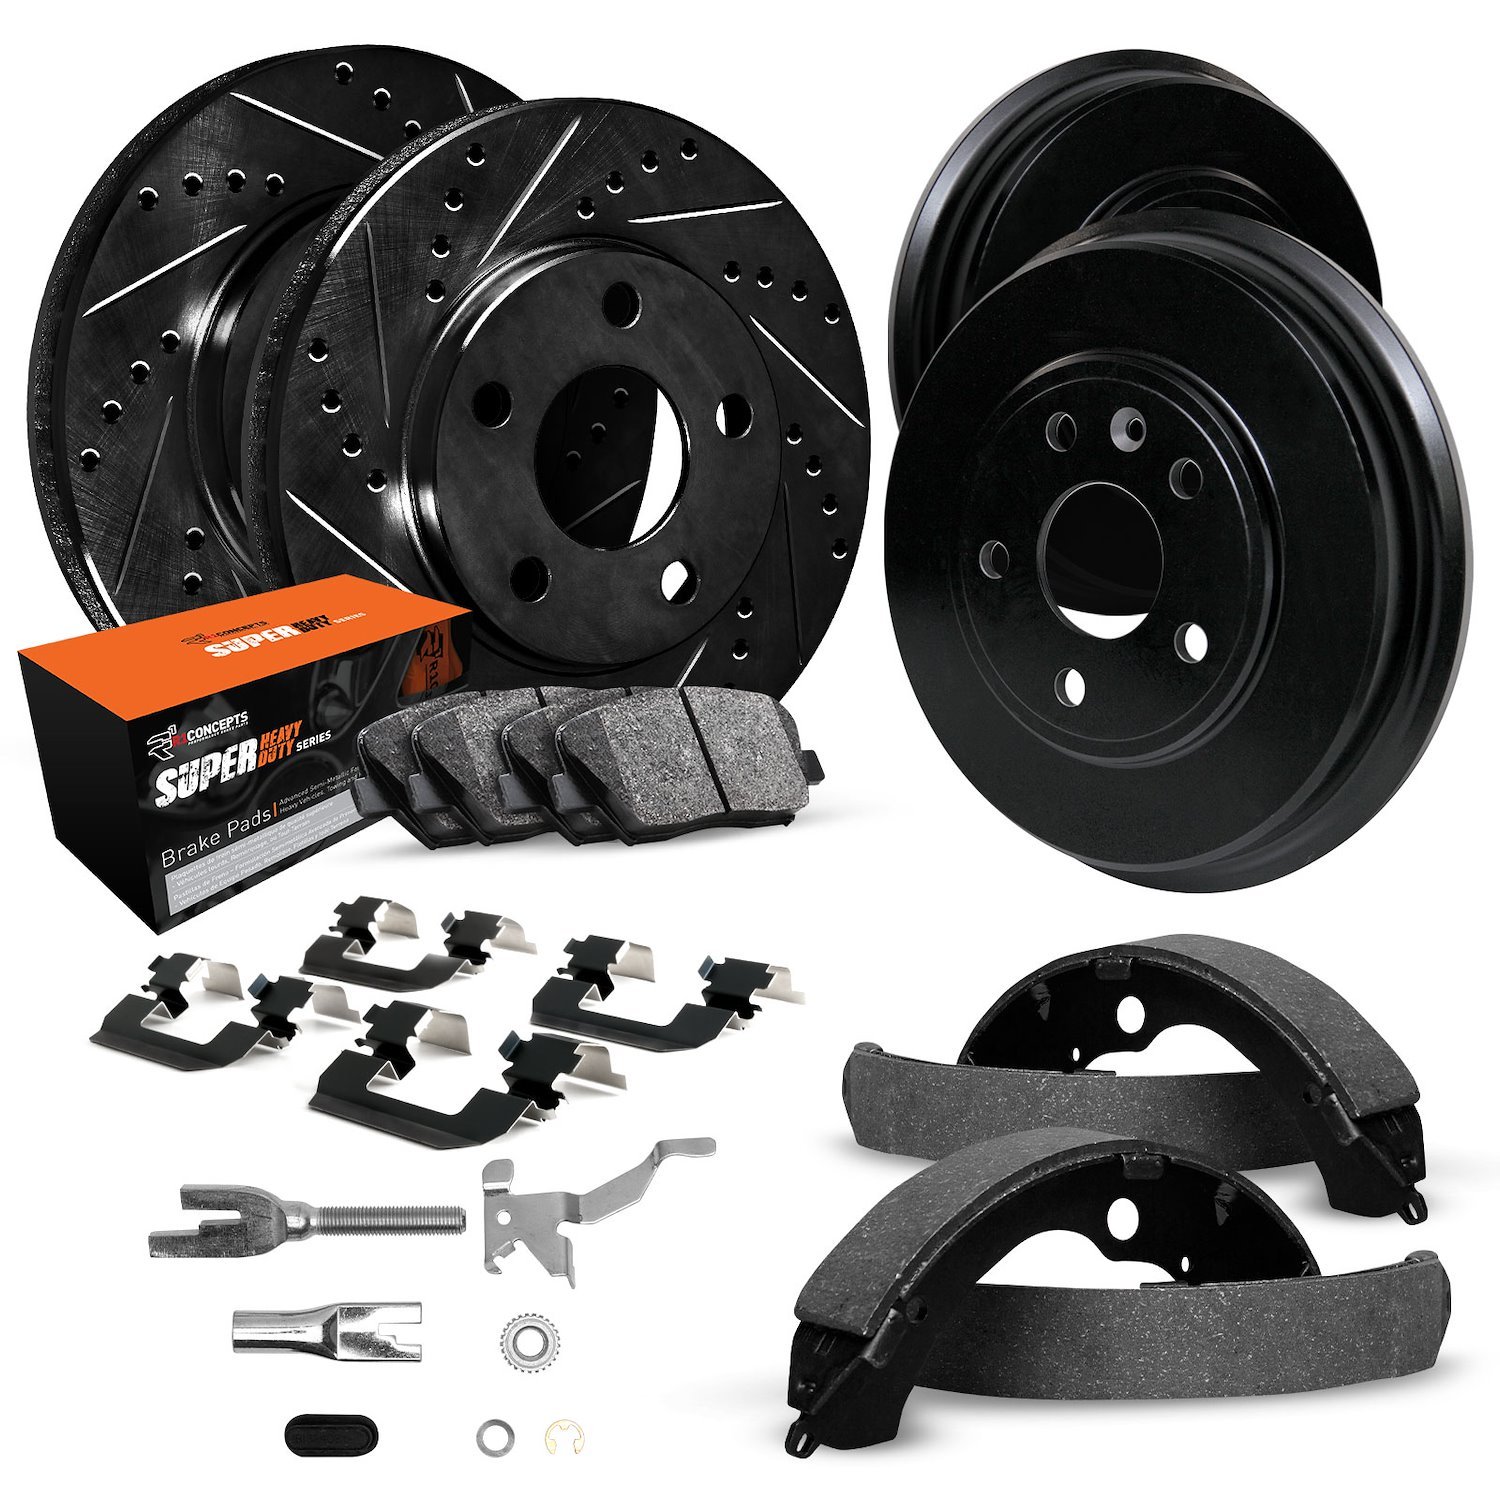 E-Line Slotted Black Brake Rotor & Drum Set w/Super-Duty Pads, Shoes, Hardware/Adjusters, 1986-1986 Ford/Lincoln/Mercury/Mazda